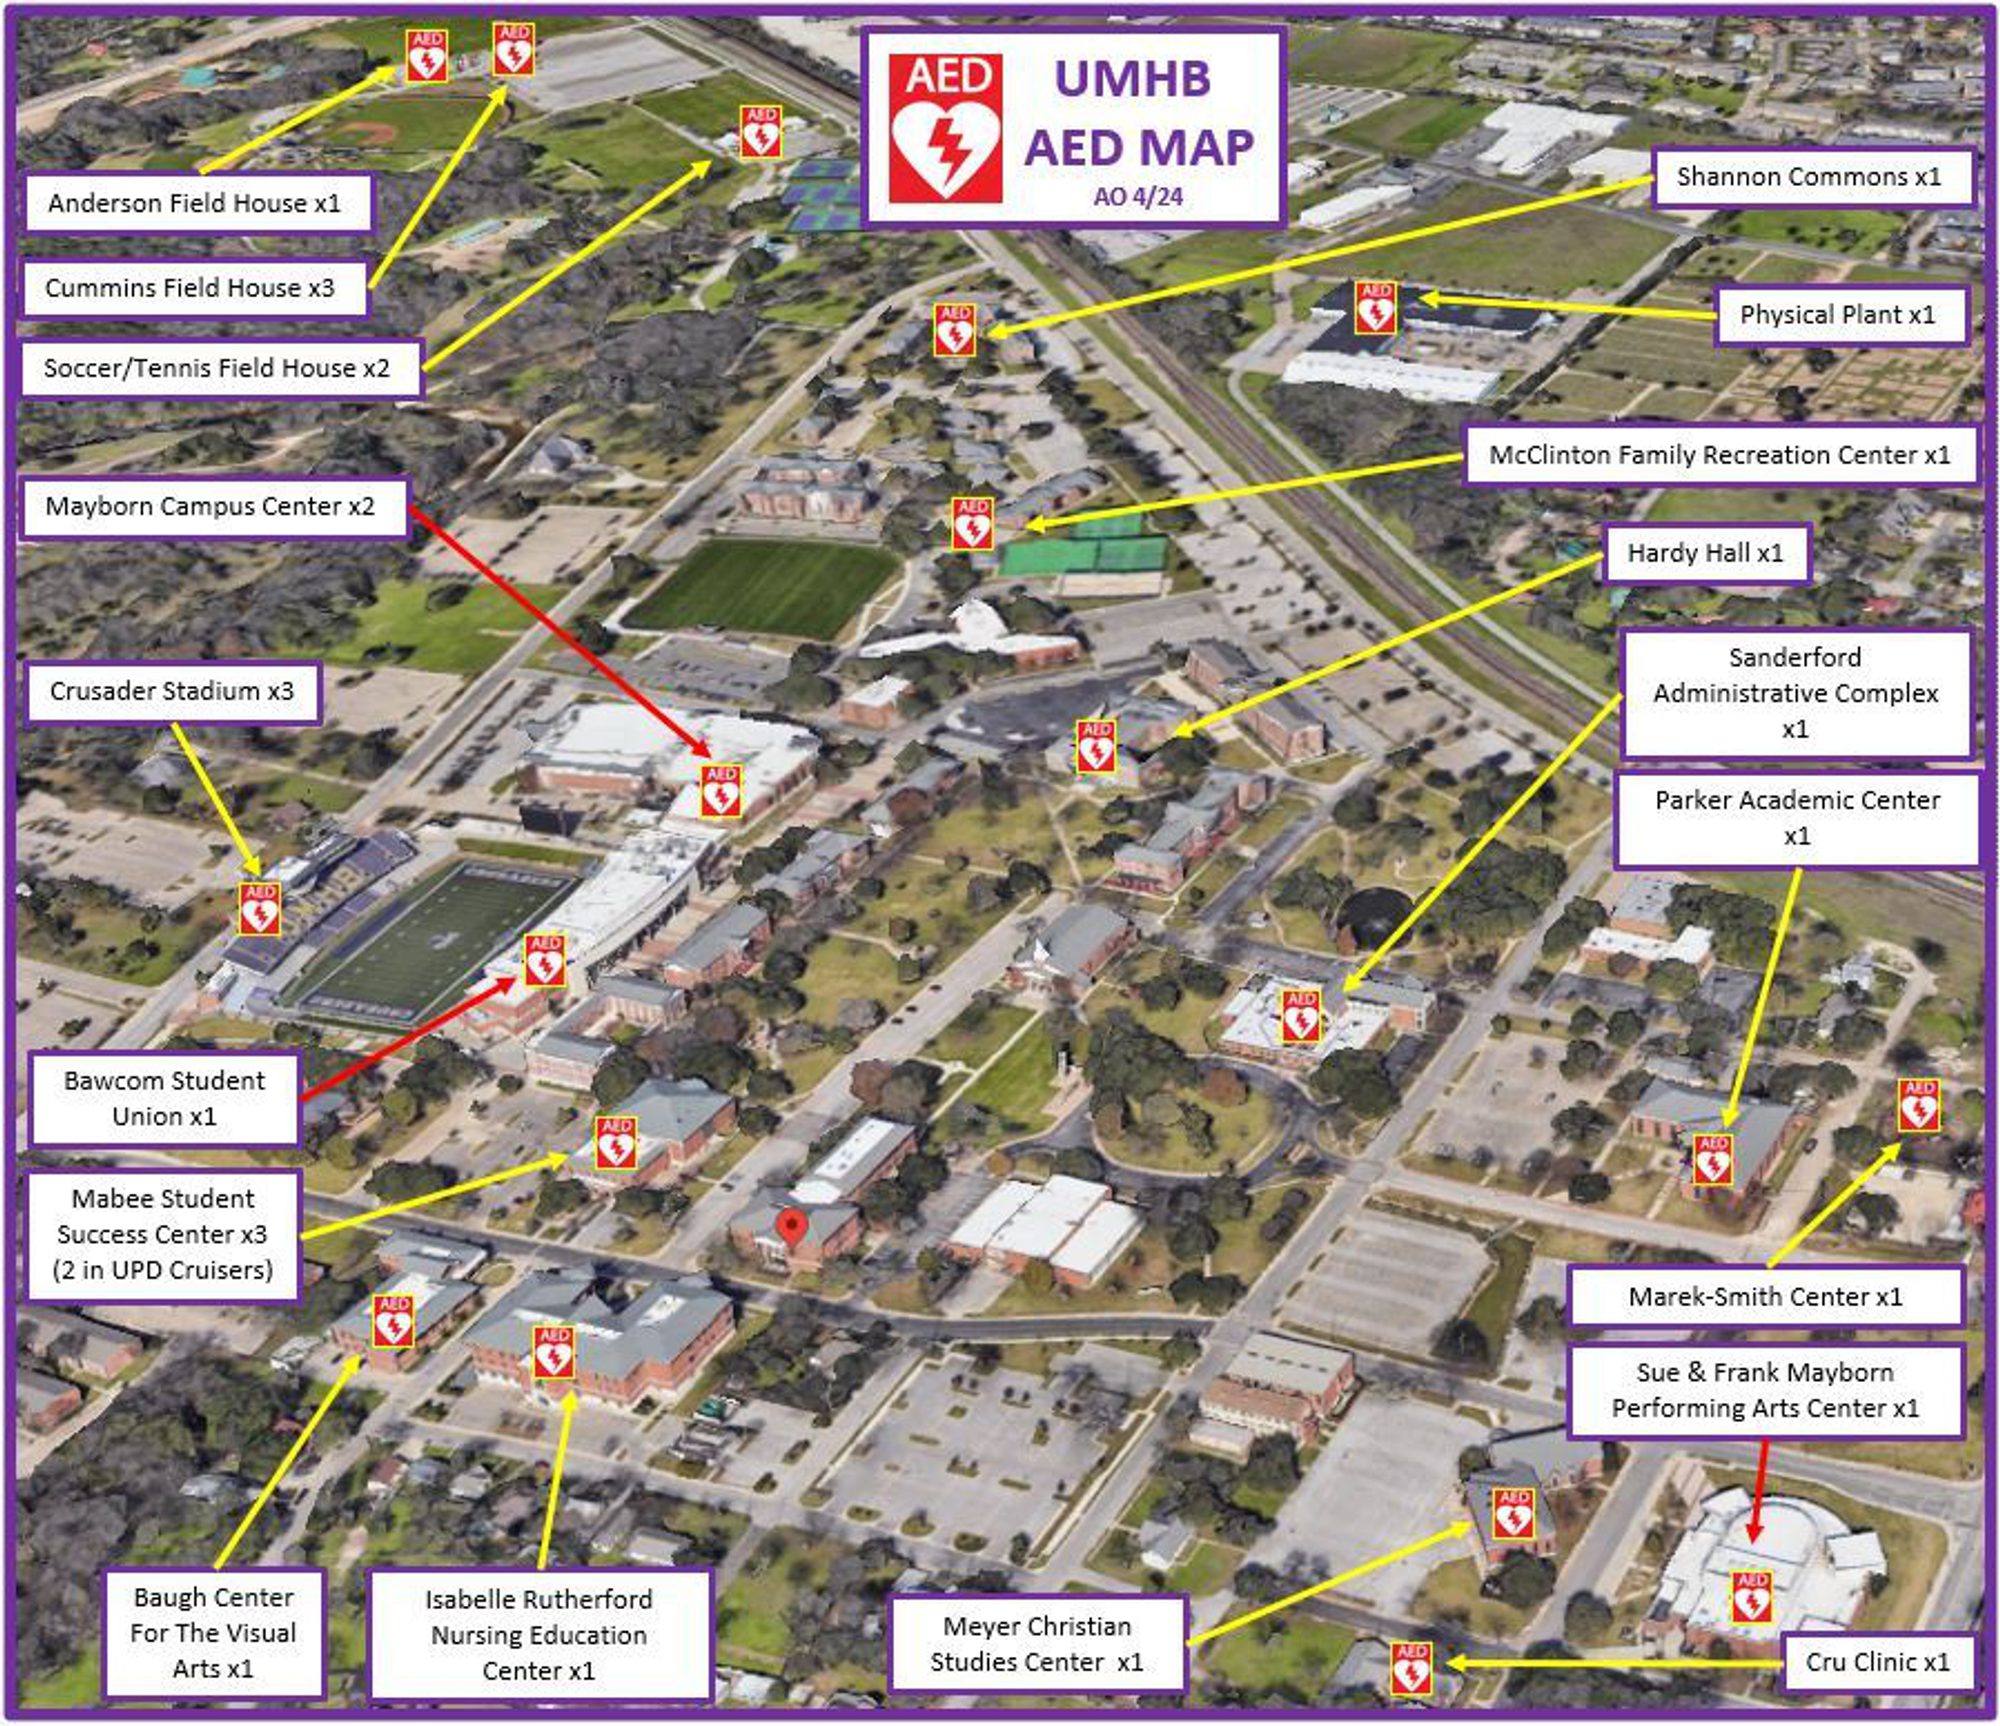 A Map of Campus AED Locations